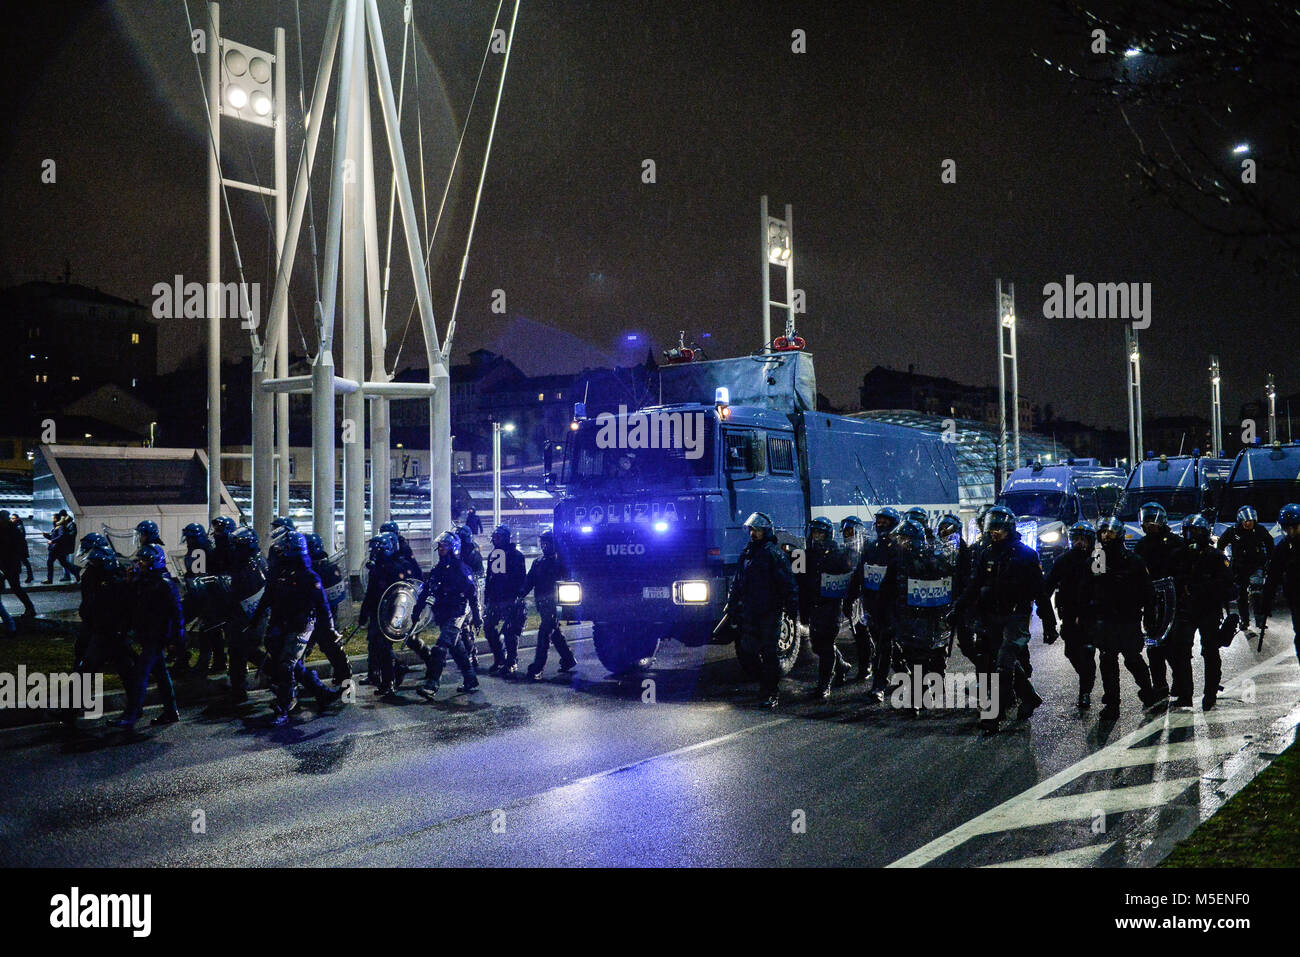 February 22, 2018 - Turin, Italy-February 22, 2018: Anti-fascist protest demonstration against the candidate of the fascist political party Casapound. Clashes between antagonists and police in Turin Credit: Stefano Guidi/ZUMA Wire/Alamy Live News Stock Photo